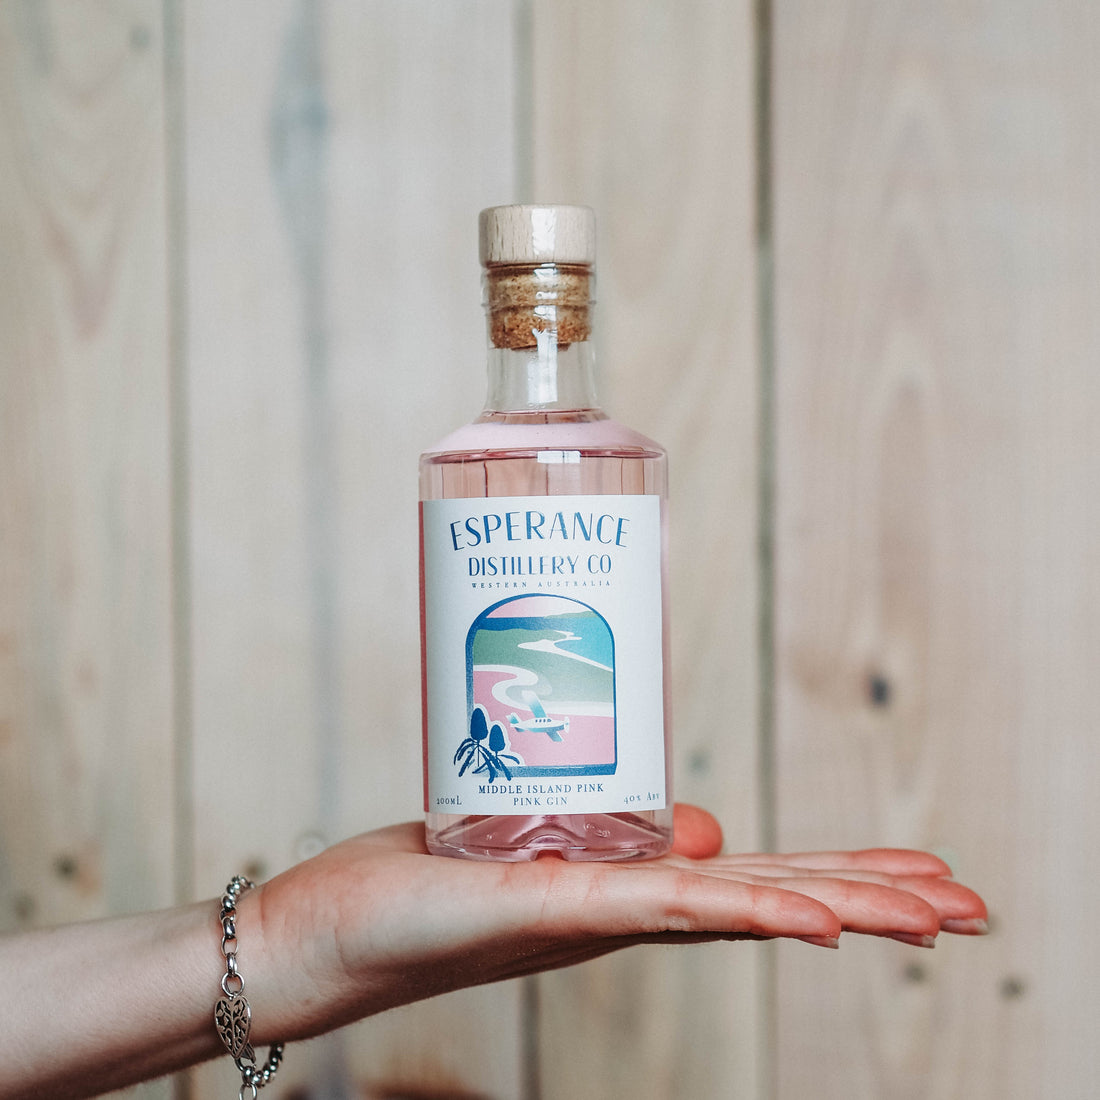 Middle Island Pink Gin